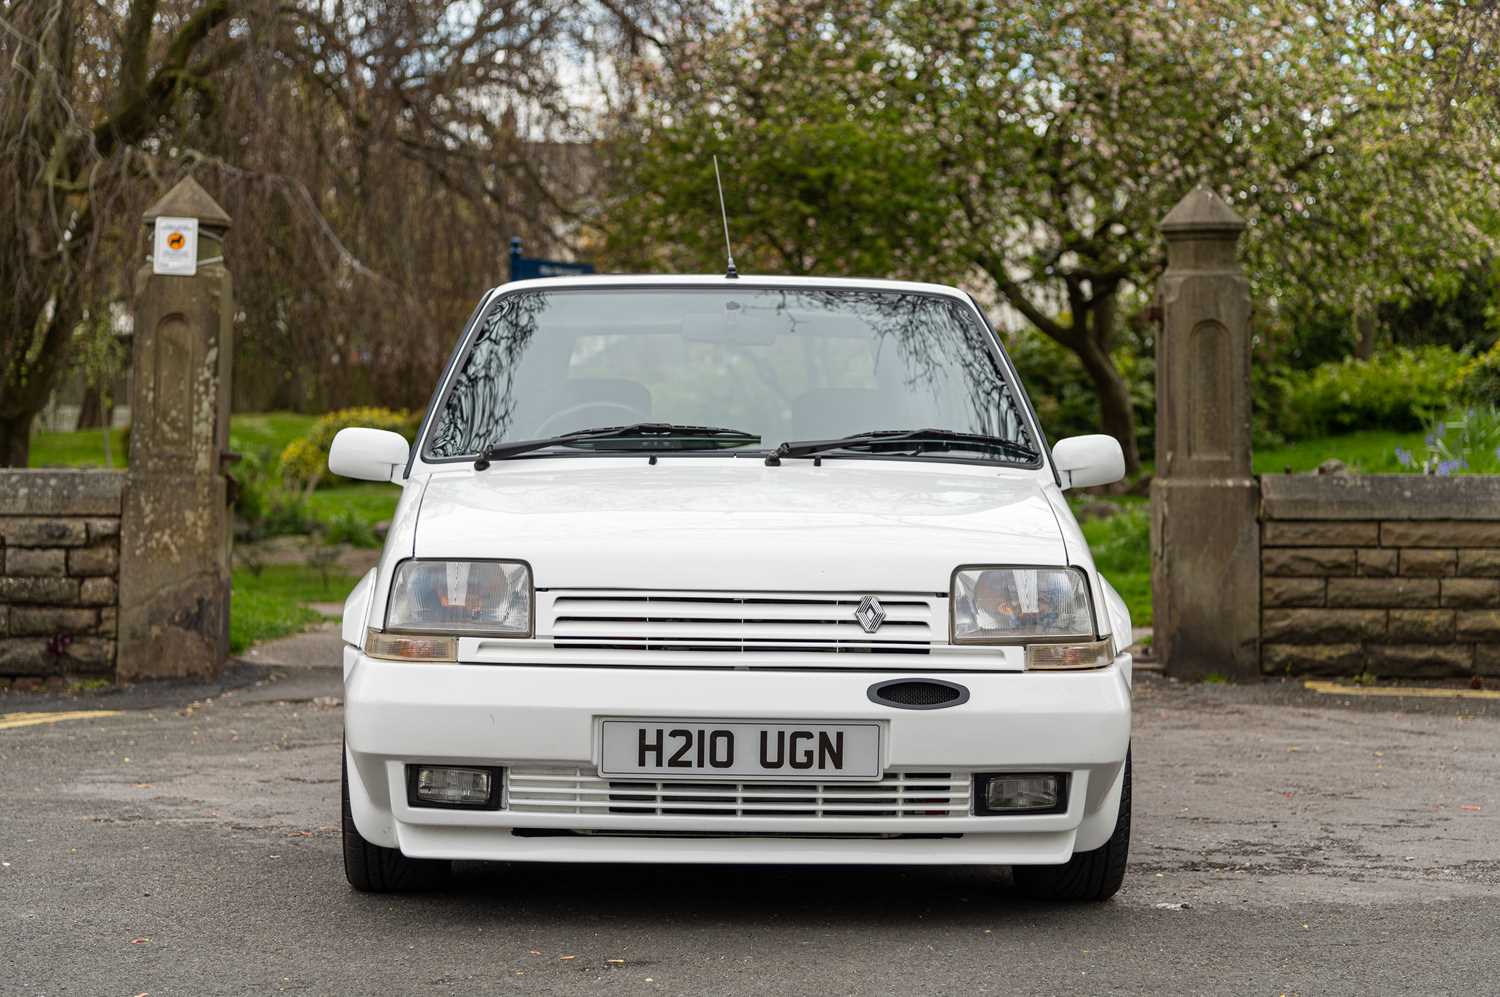 1990 Renault 5 GT Turbo - Image 3 of 79